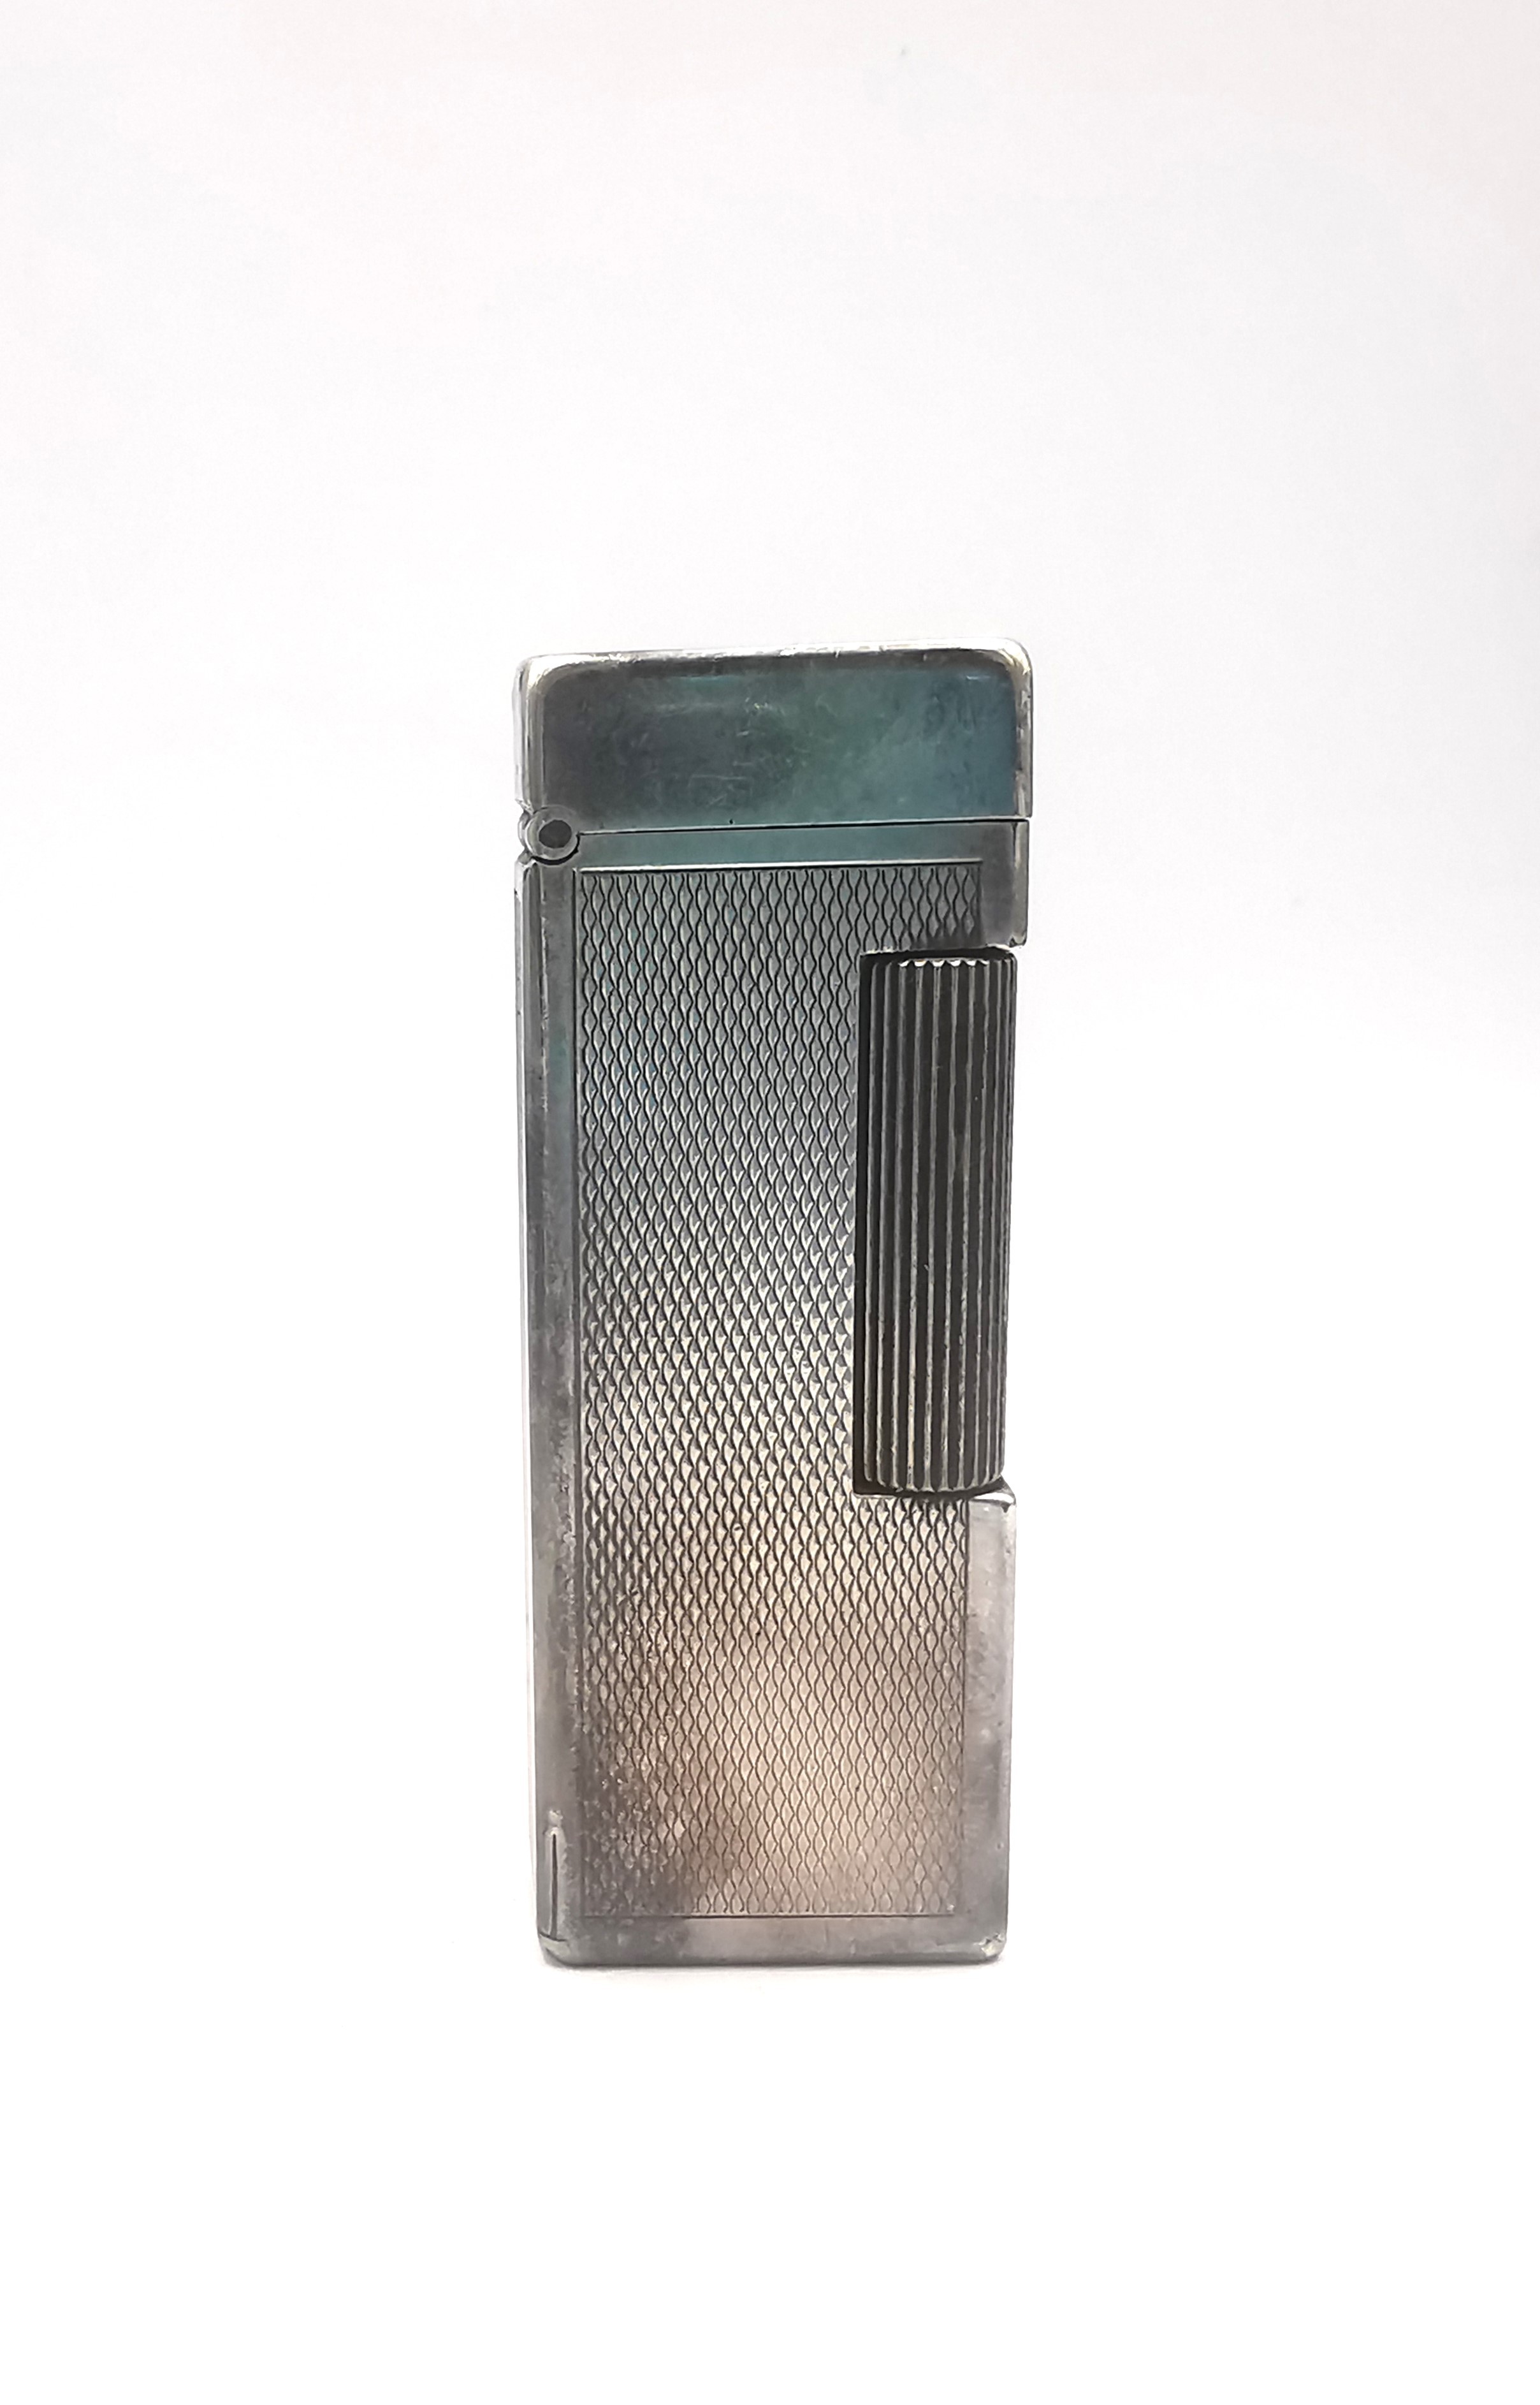 A cased silver Dunhill lighter, marked Made in Switzerland, Dunhill, London with patent LIC USA - Image 5 of 11